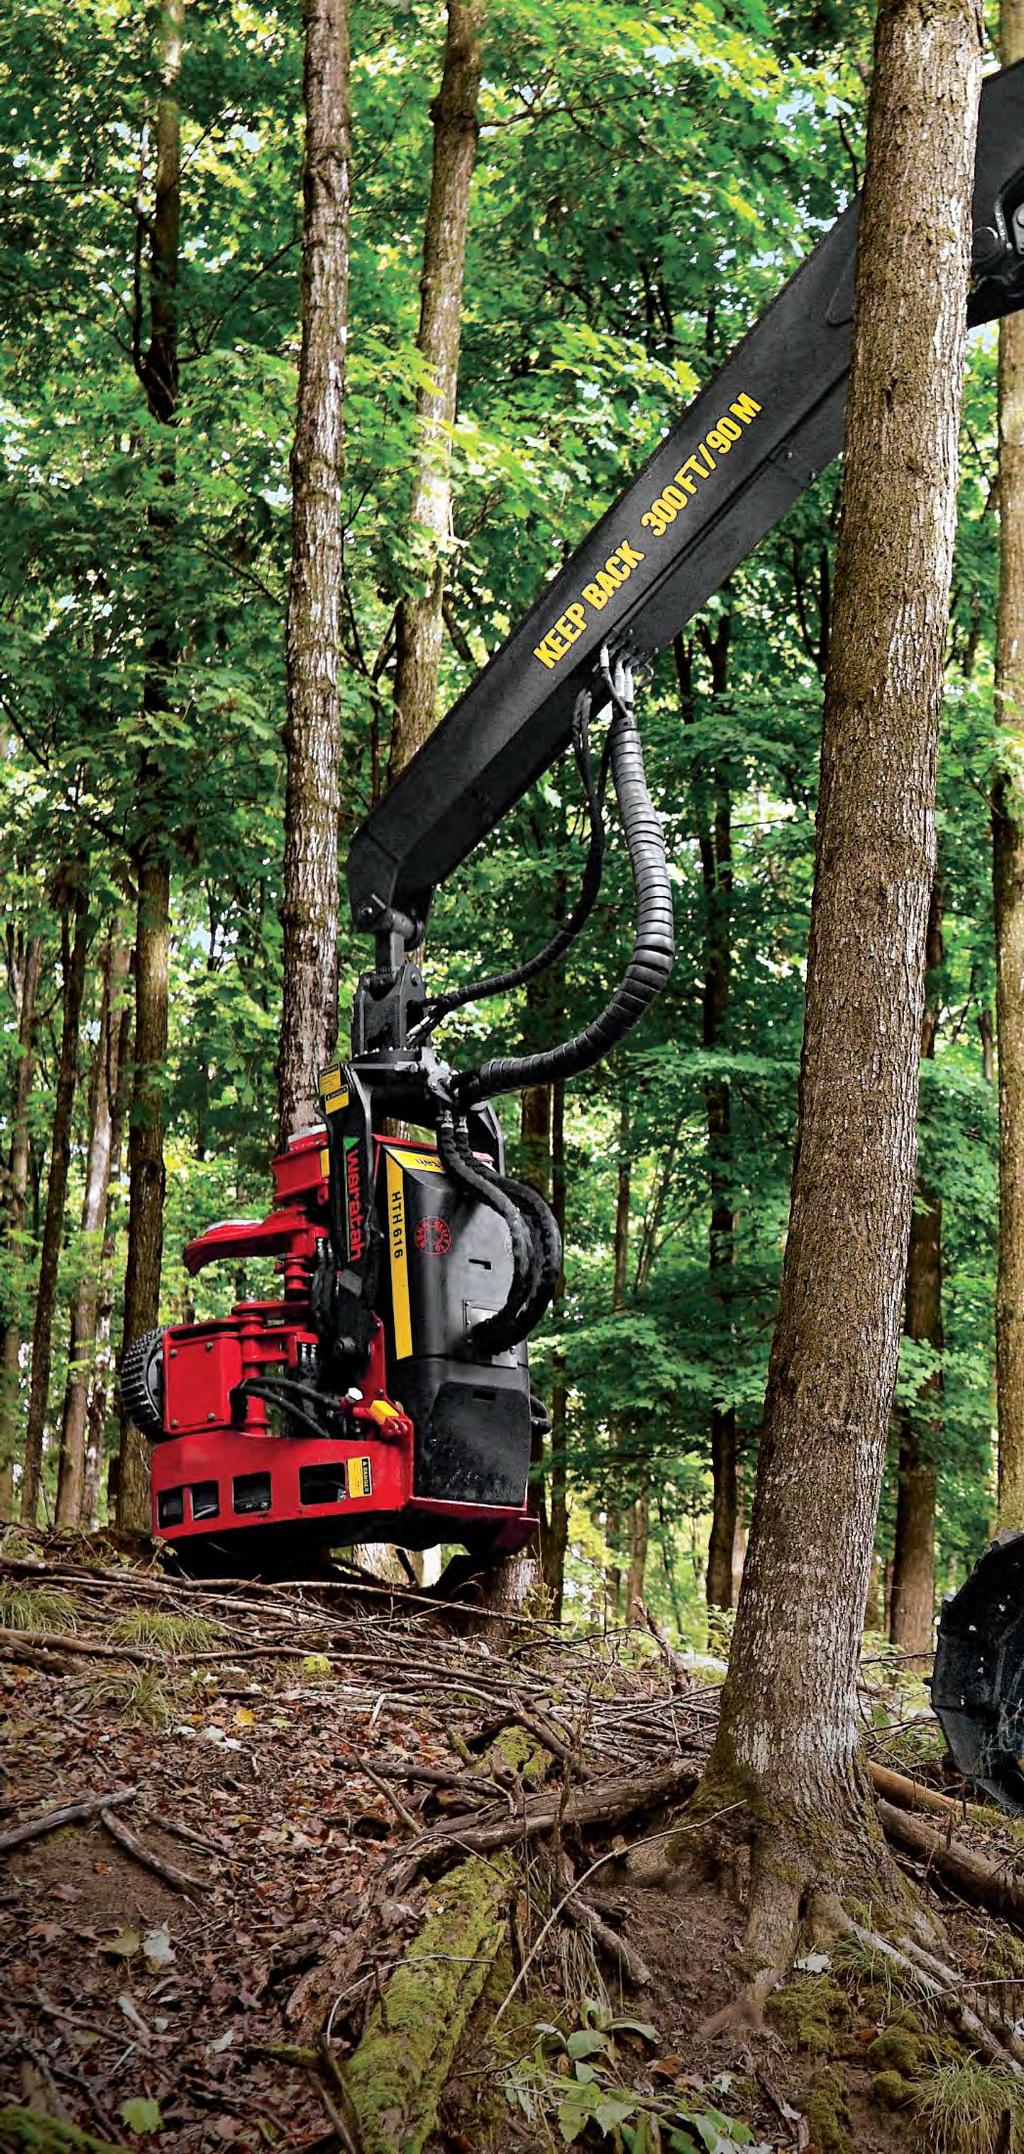 Get where you need to go our harvesters can handle steep grades, stumps, and sloping terrain.